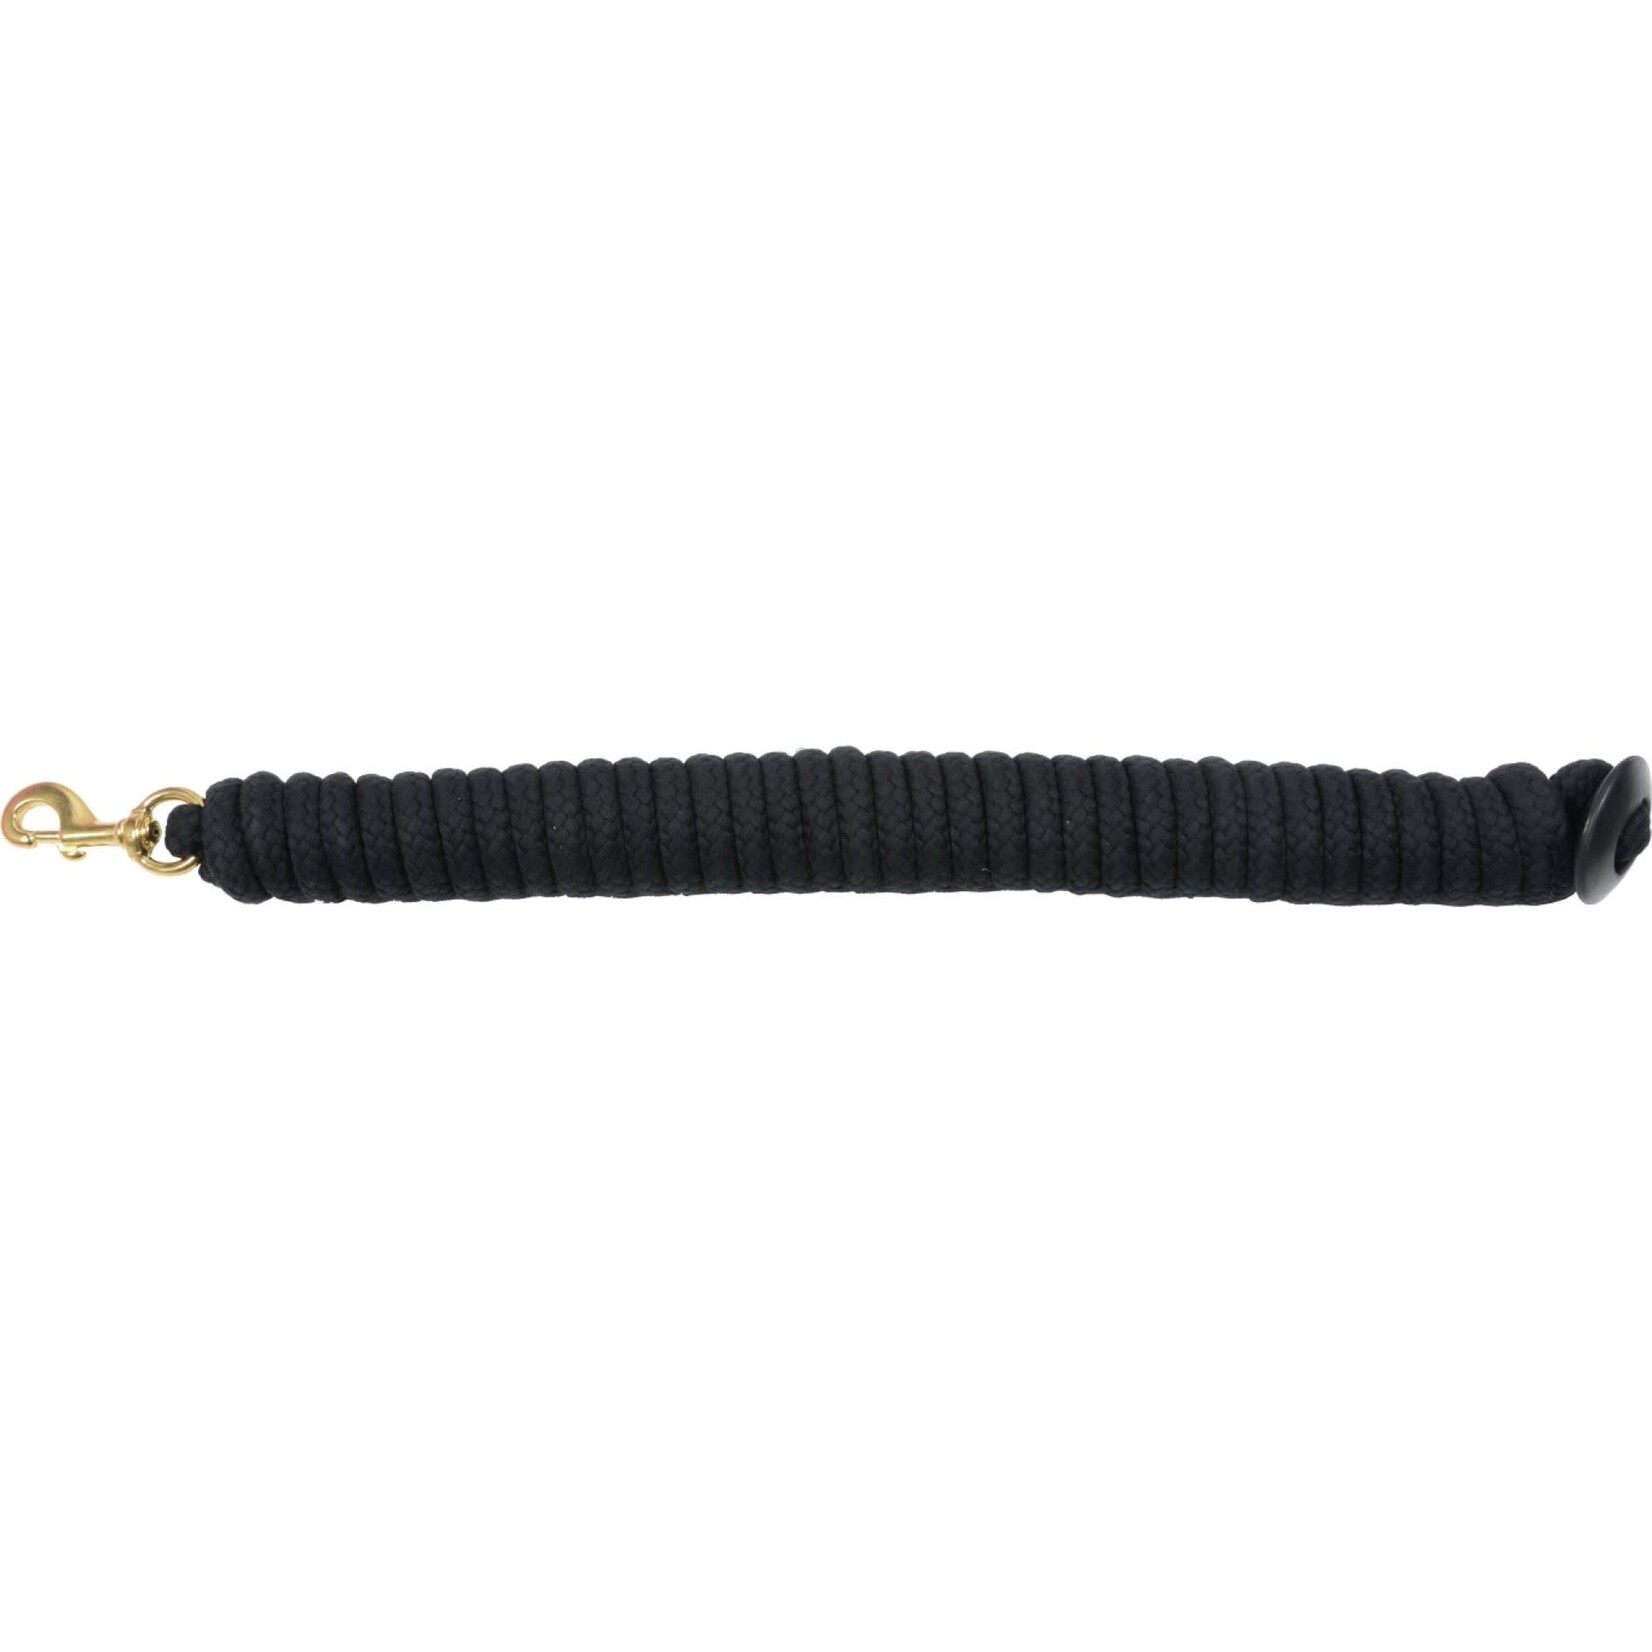 Western Rawhide Cotton Lunge Line with Rubber Stop